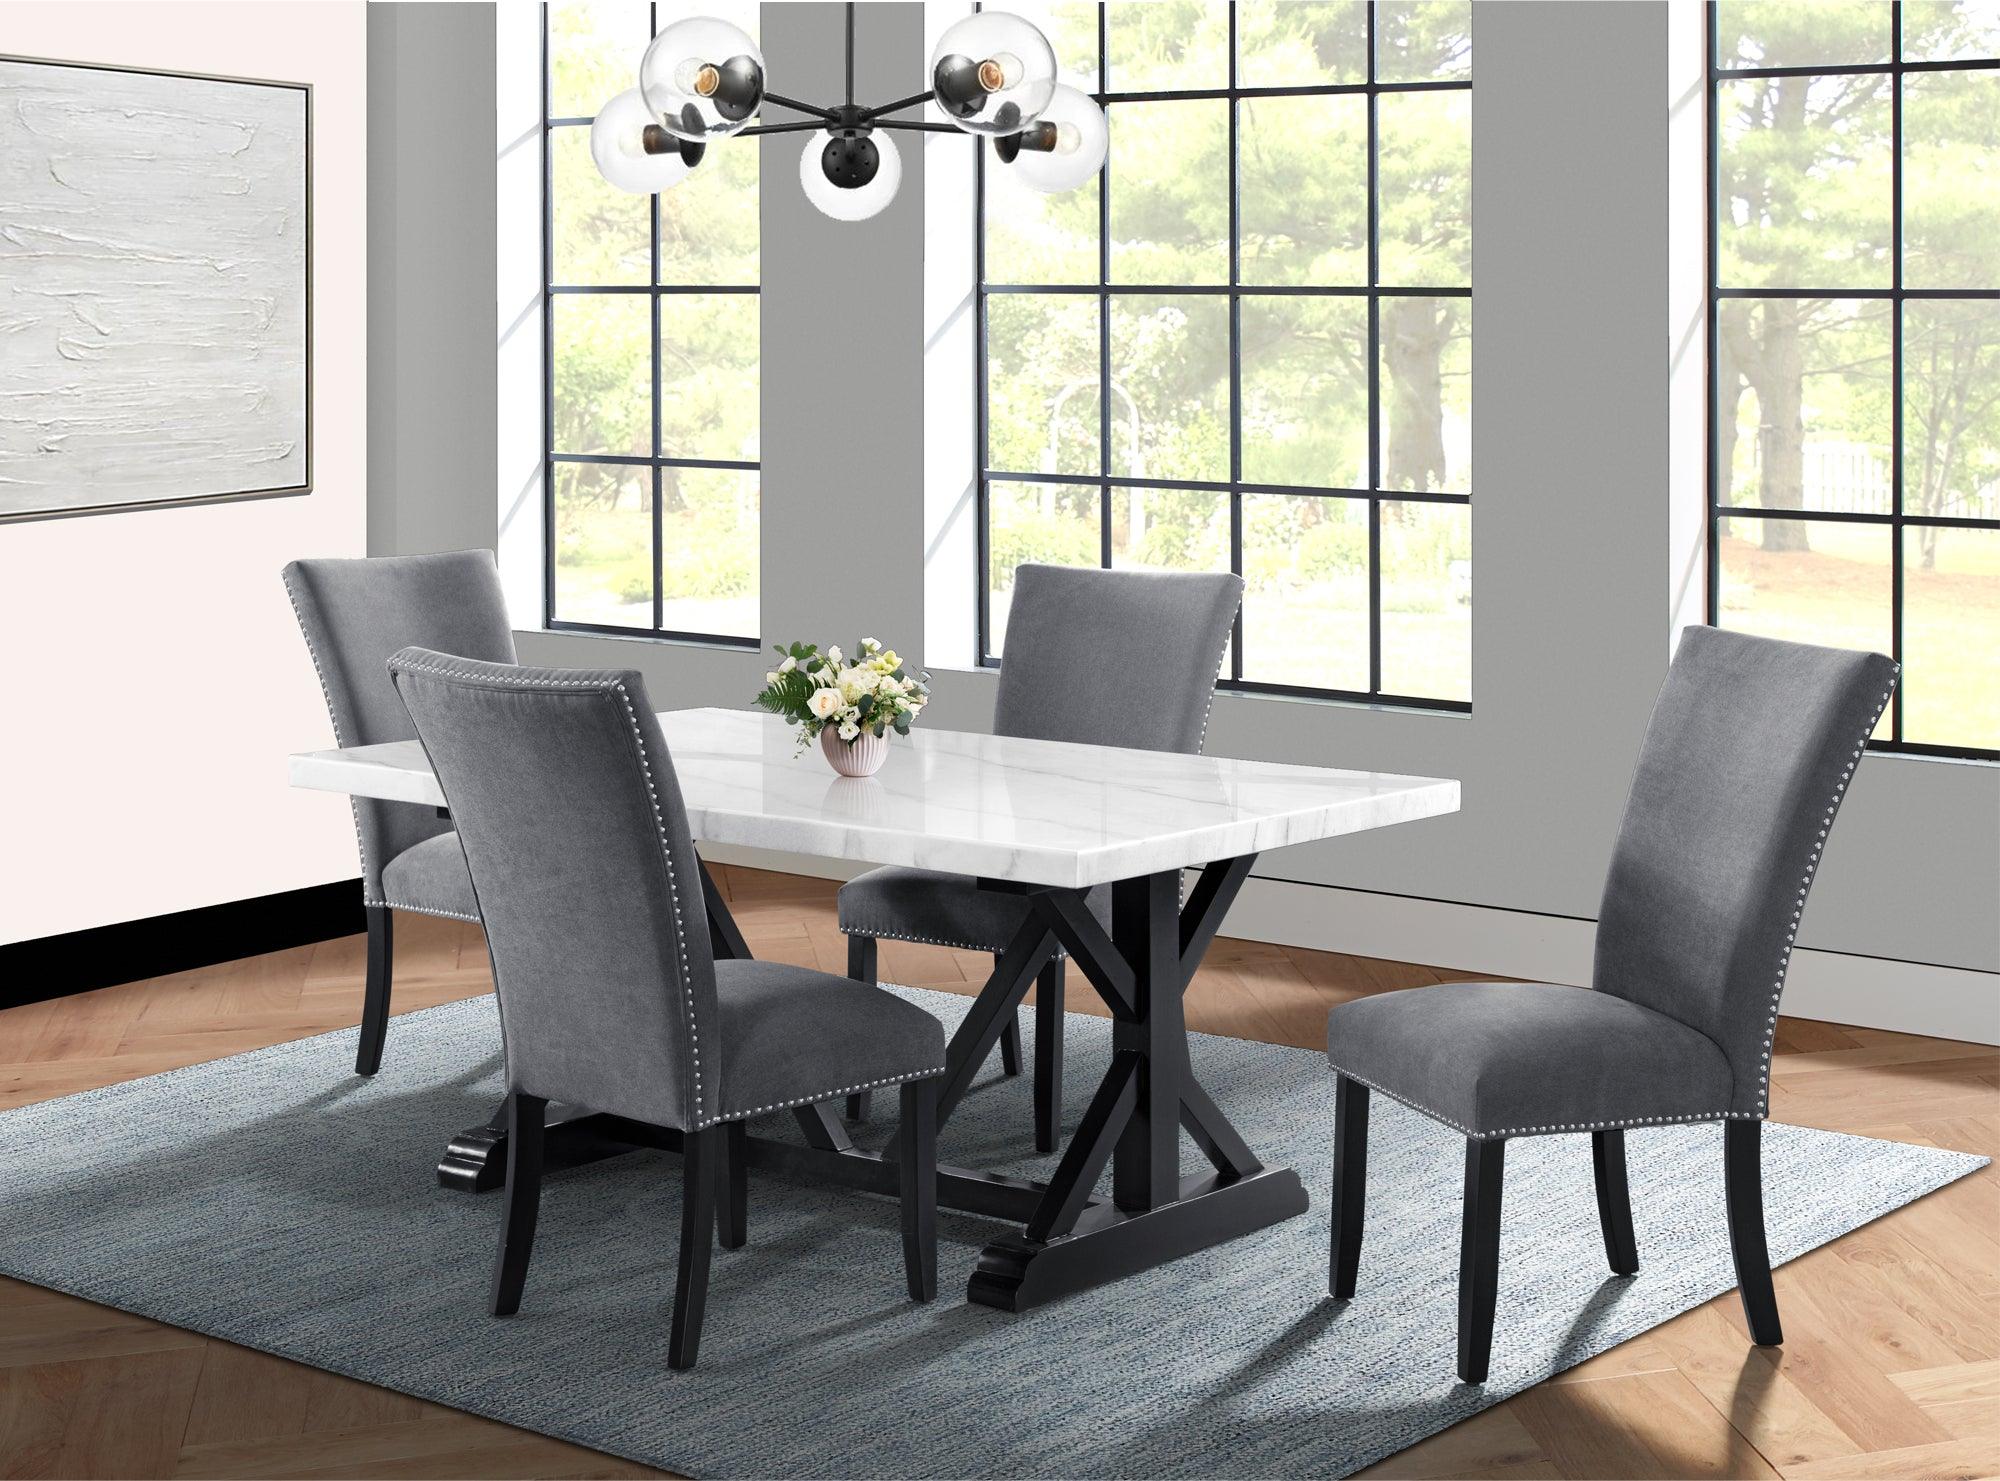 standard height for dining room table